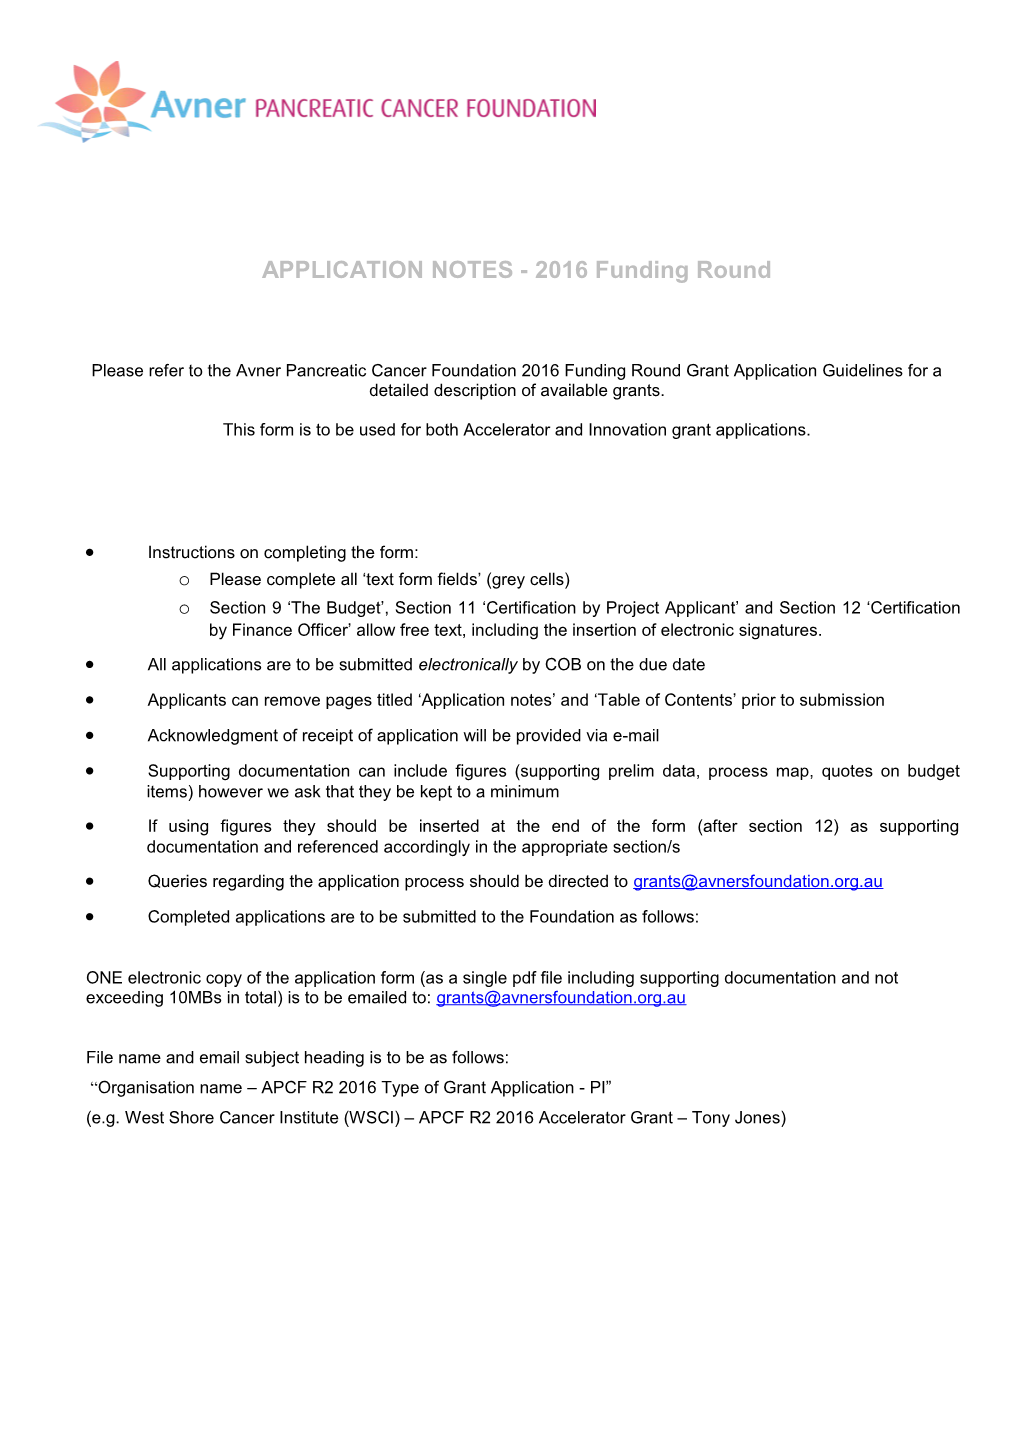 APPLICATION NOTES - 2016 Funding Round